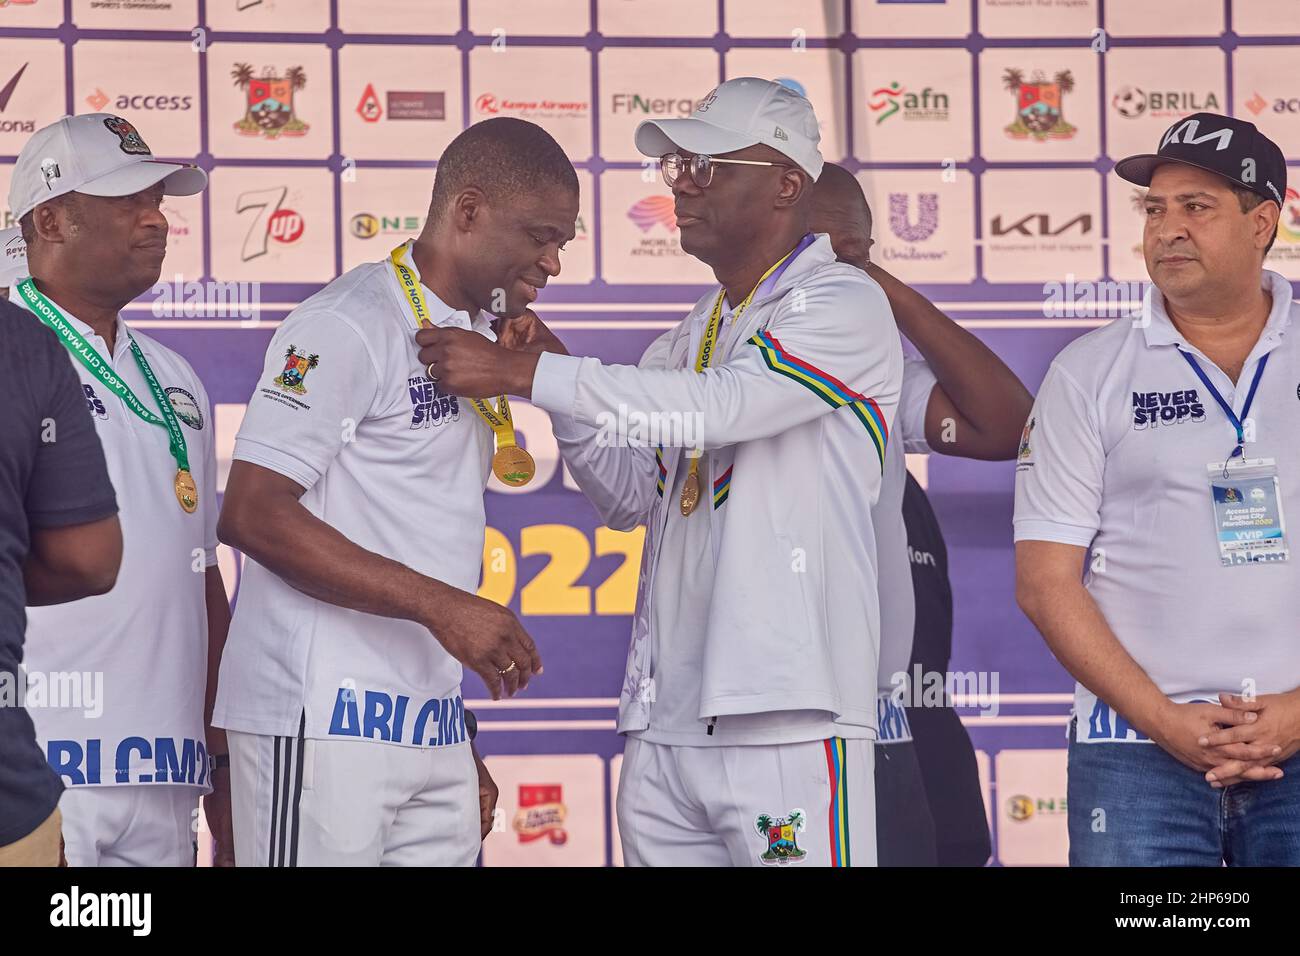 Governor of Lagos State gives a medal to the Deputy Governor of Edo State after competing in the Access Bank Lagos City Marathon on February 12, 2022. Stock Photo